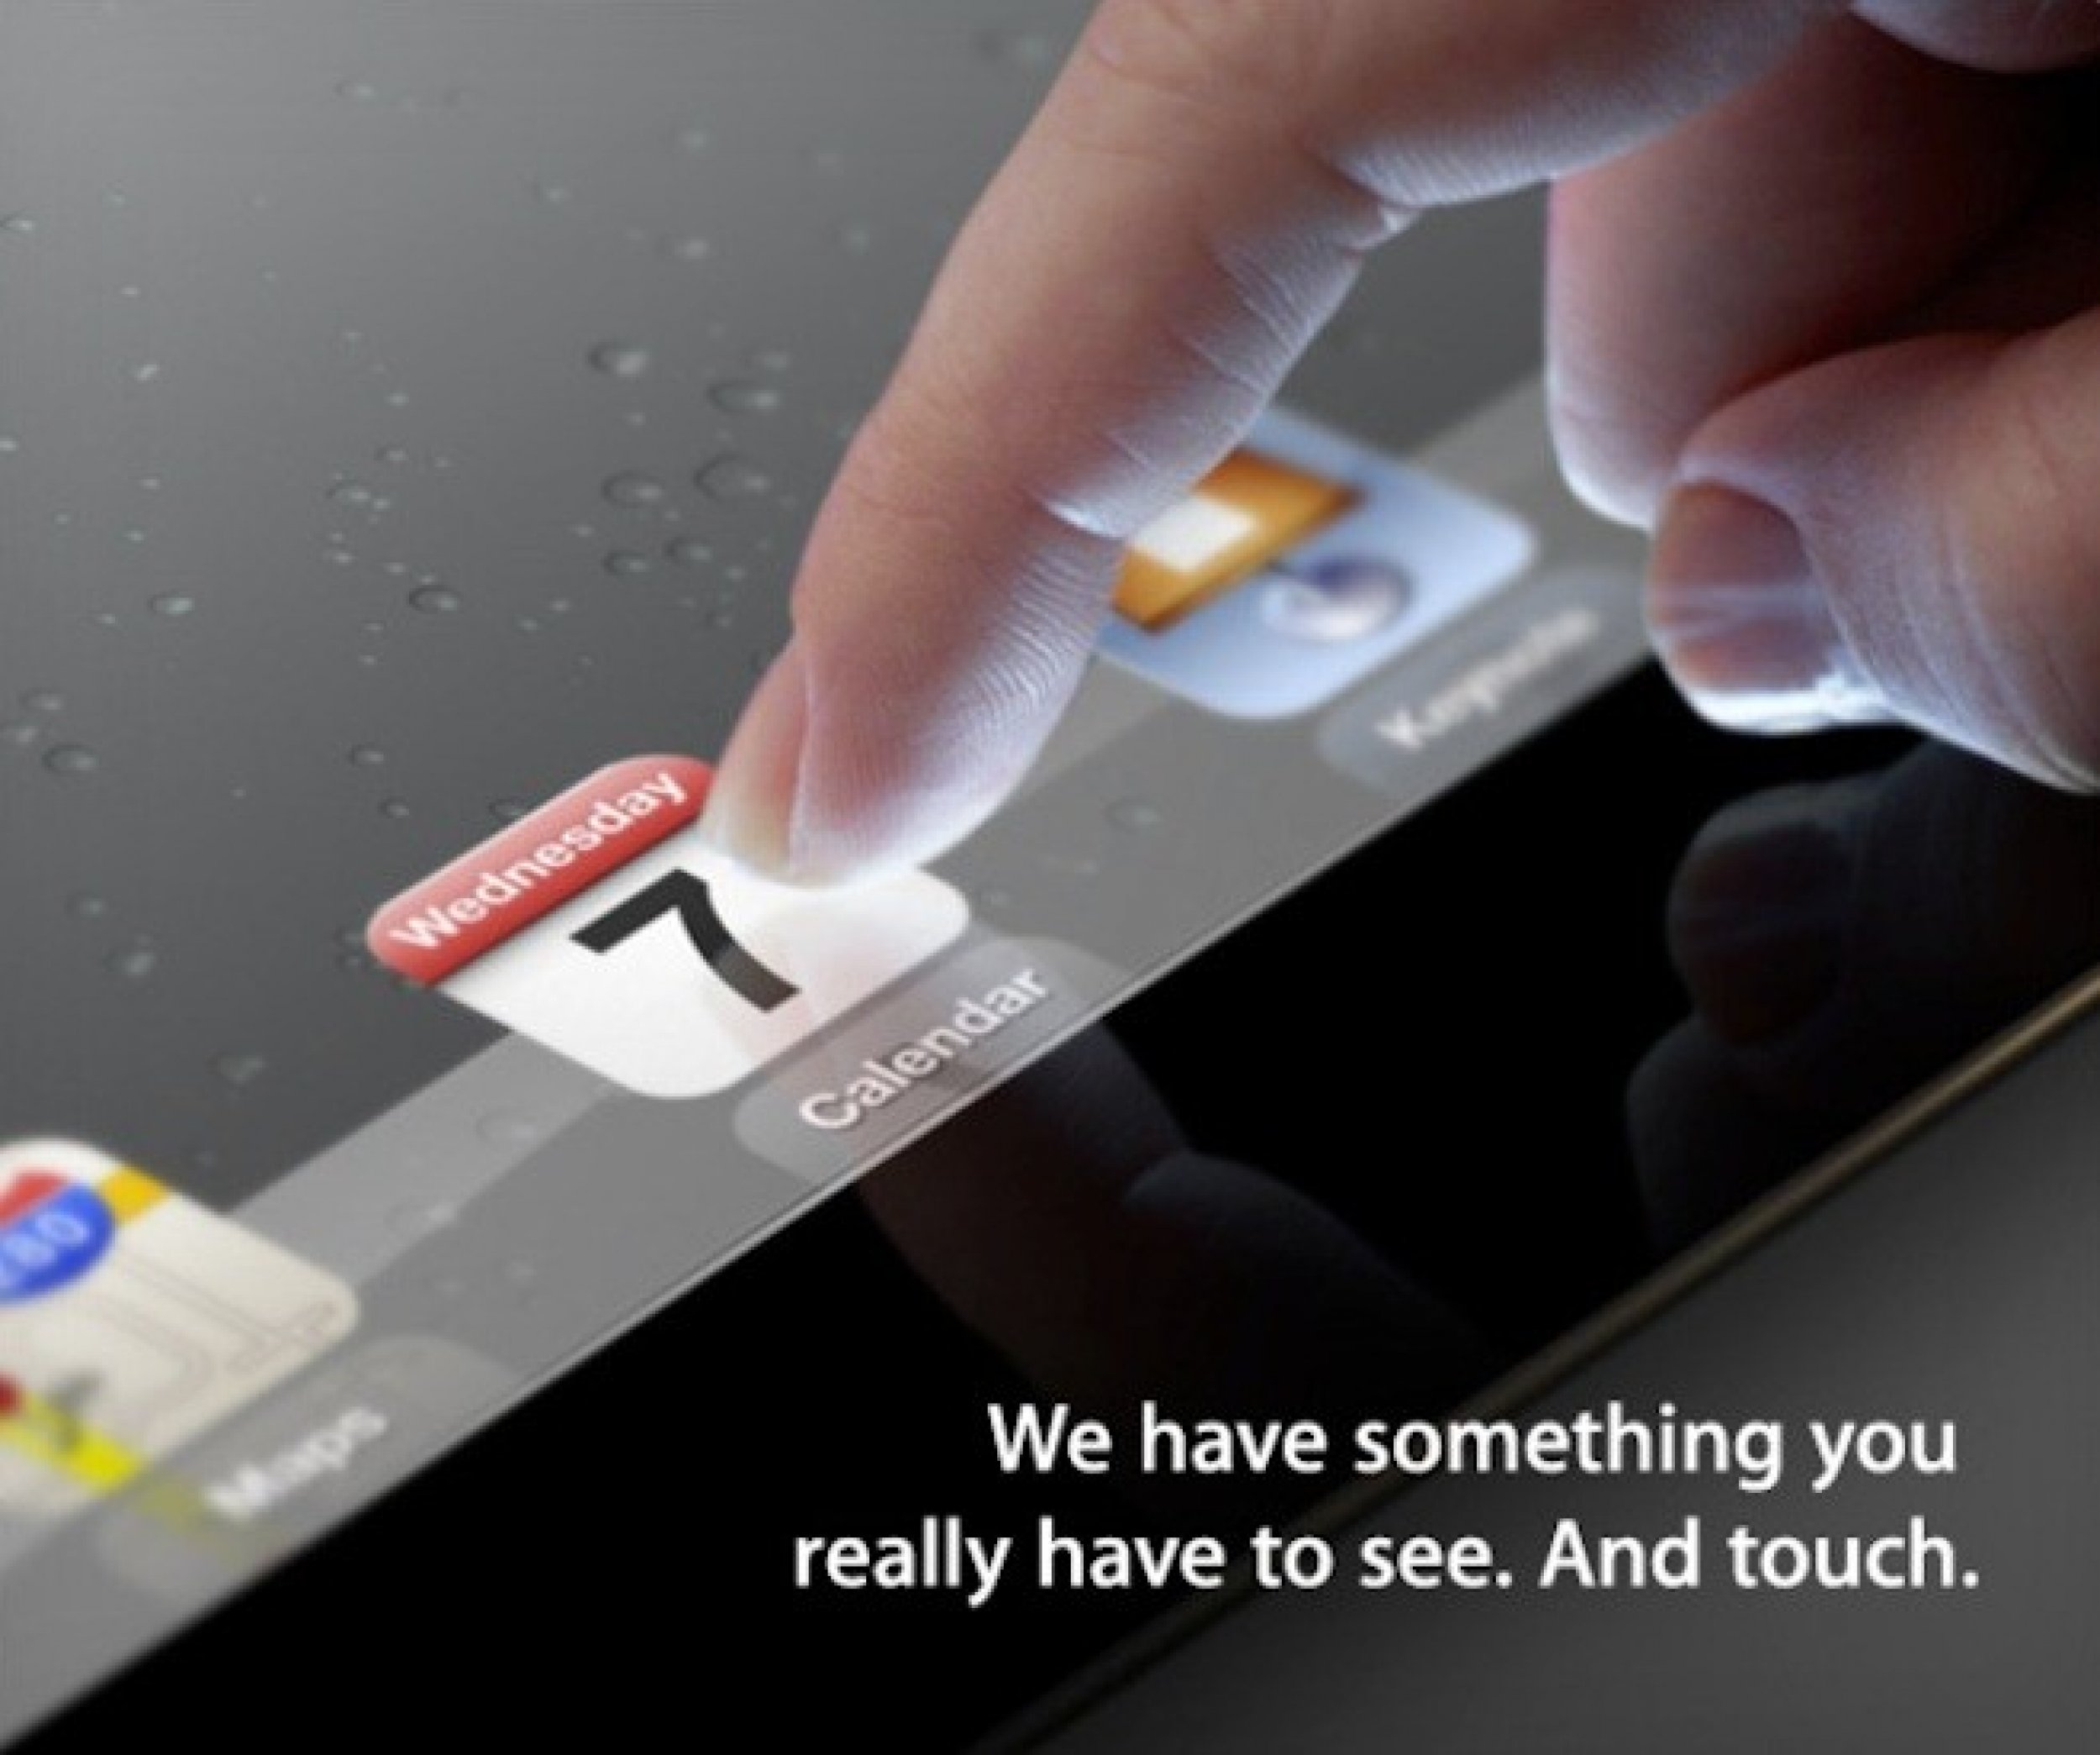 iPad 3 Release March 7 What Features will Make iPad 3 a Best Seller